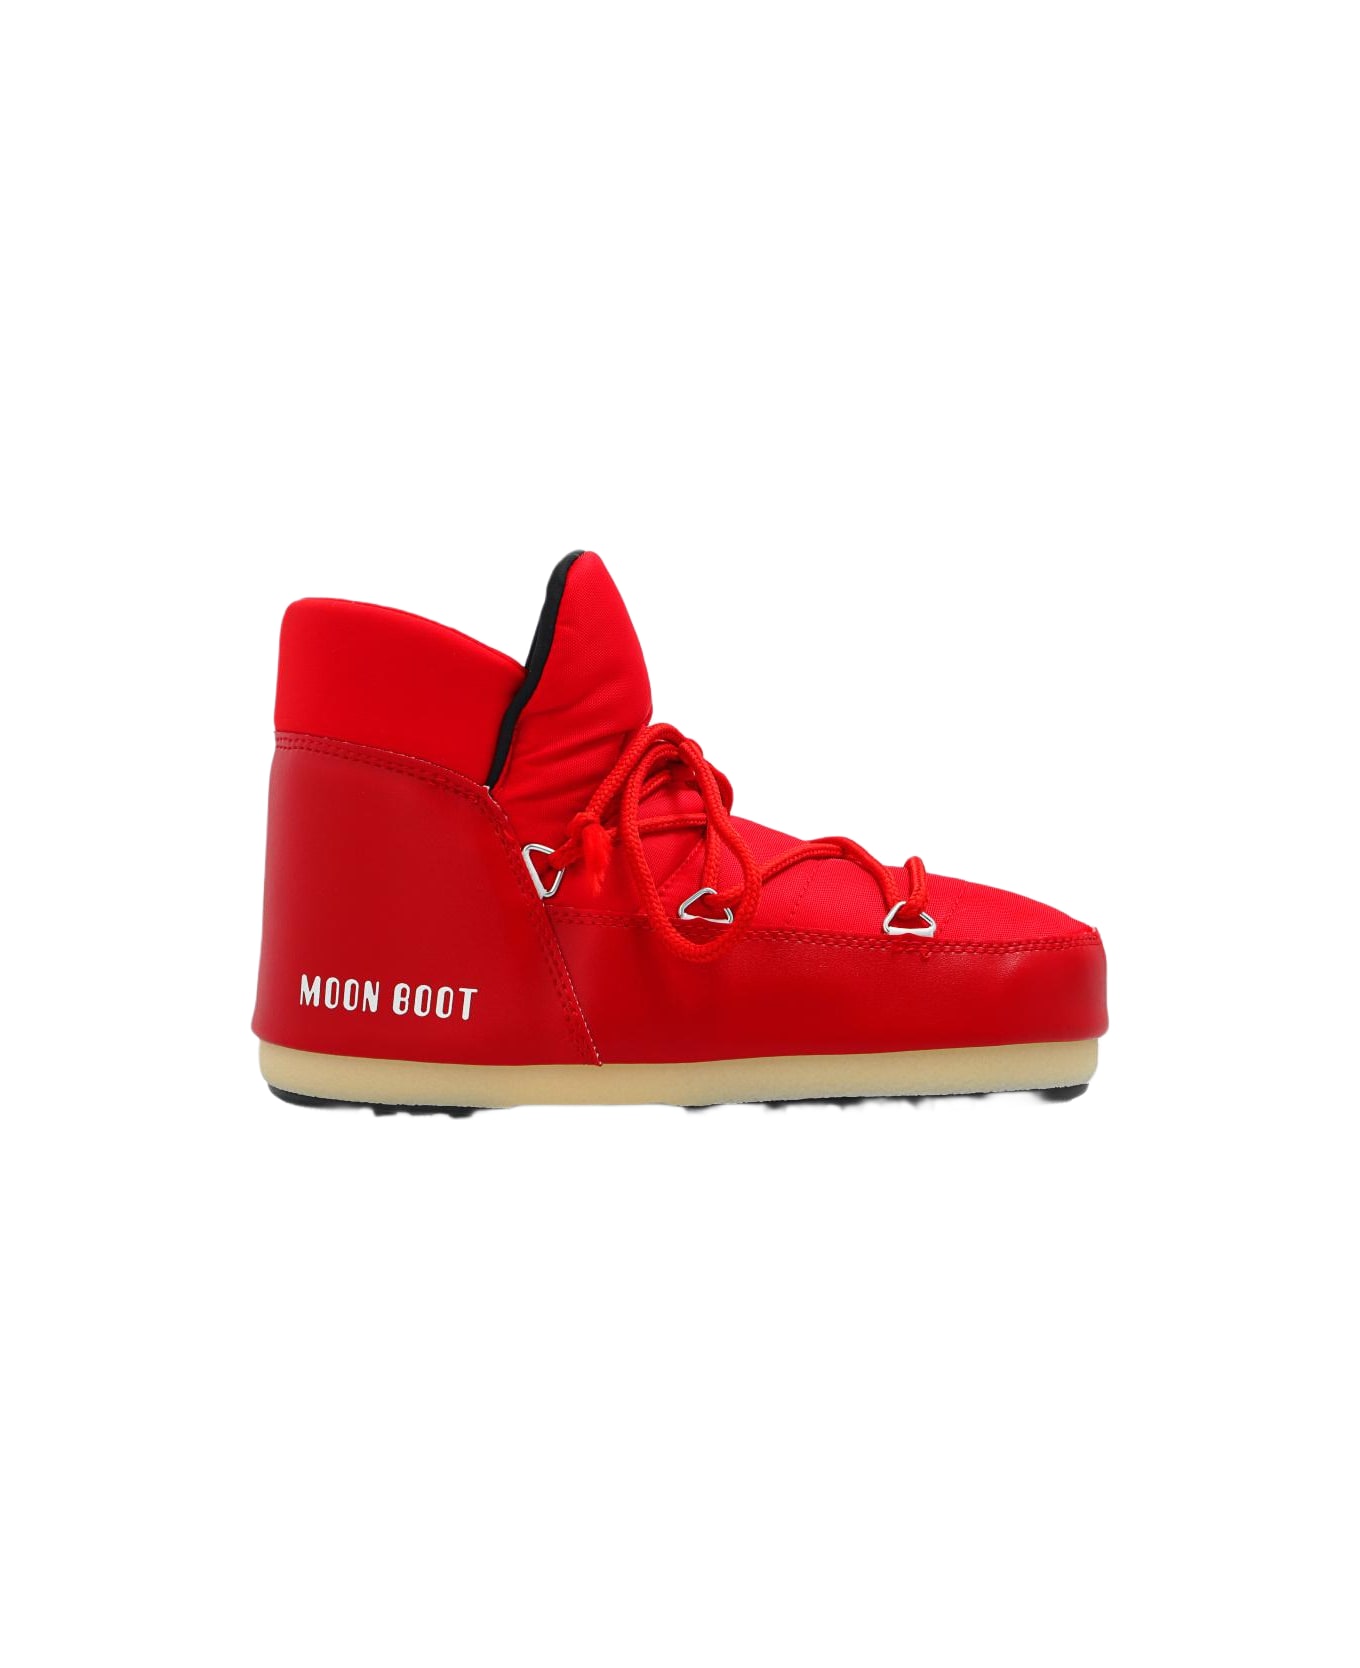 Moon Boot 'pumps Nylon' Snow Boots - RED ブーツ